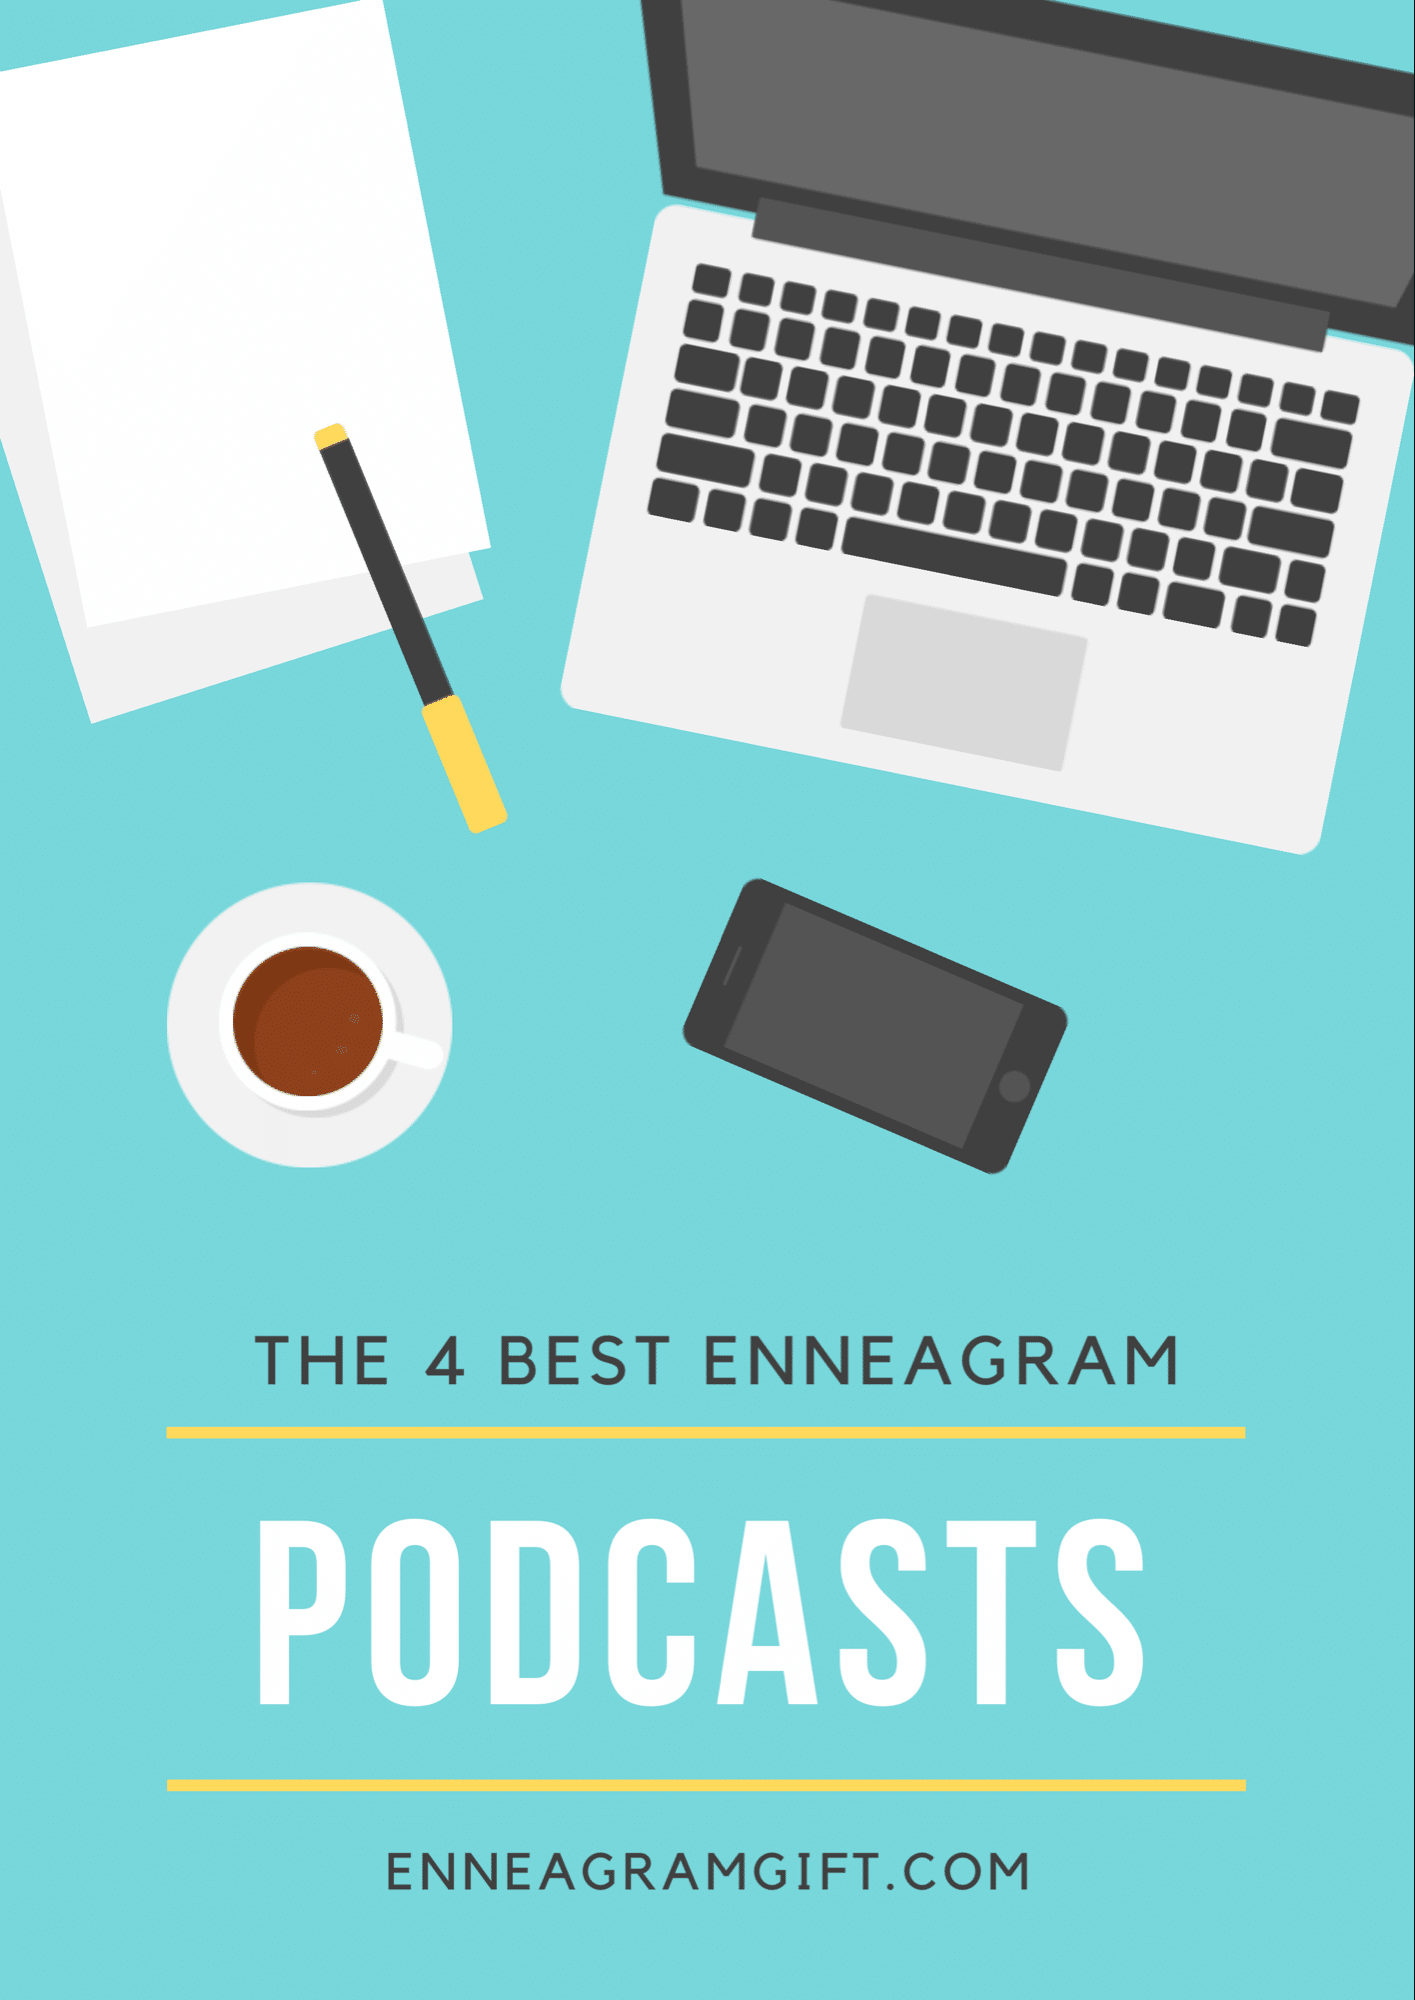 The 4 Best Enneagram Podcasts That You Should Be Listening To